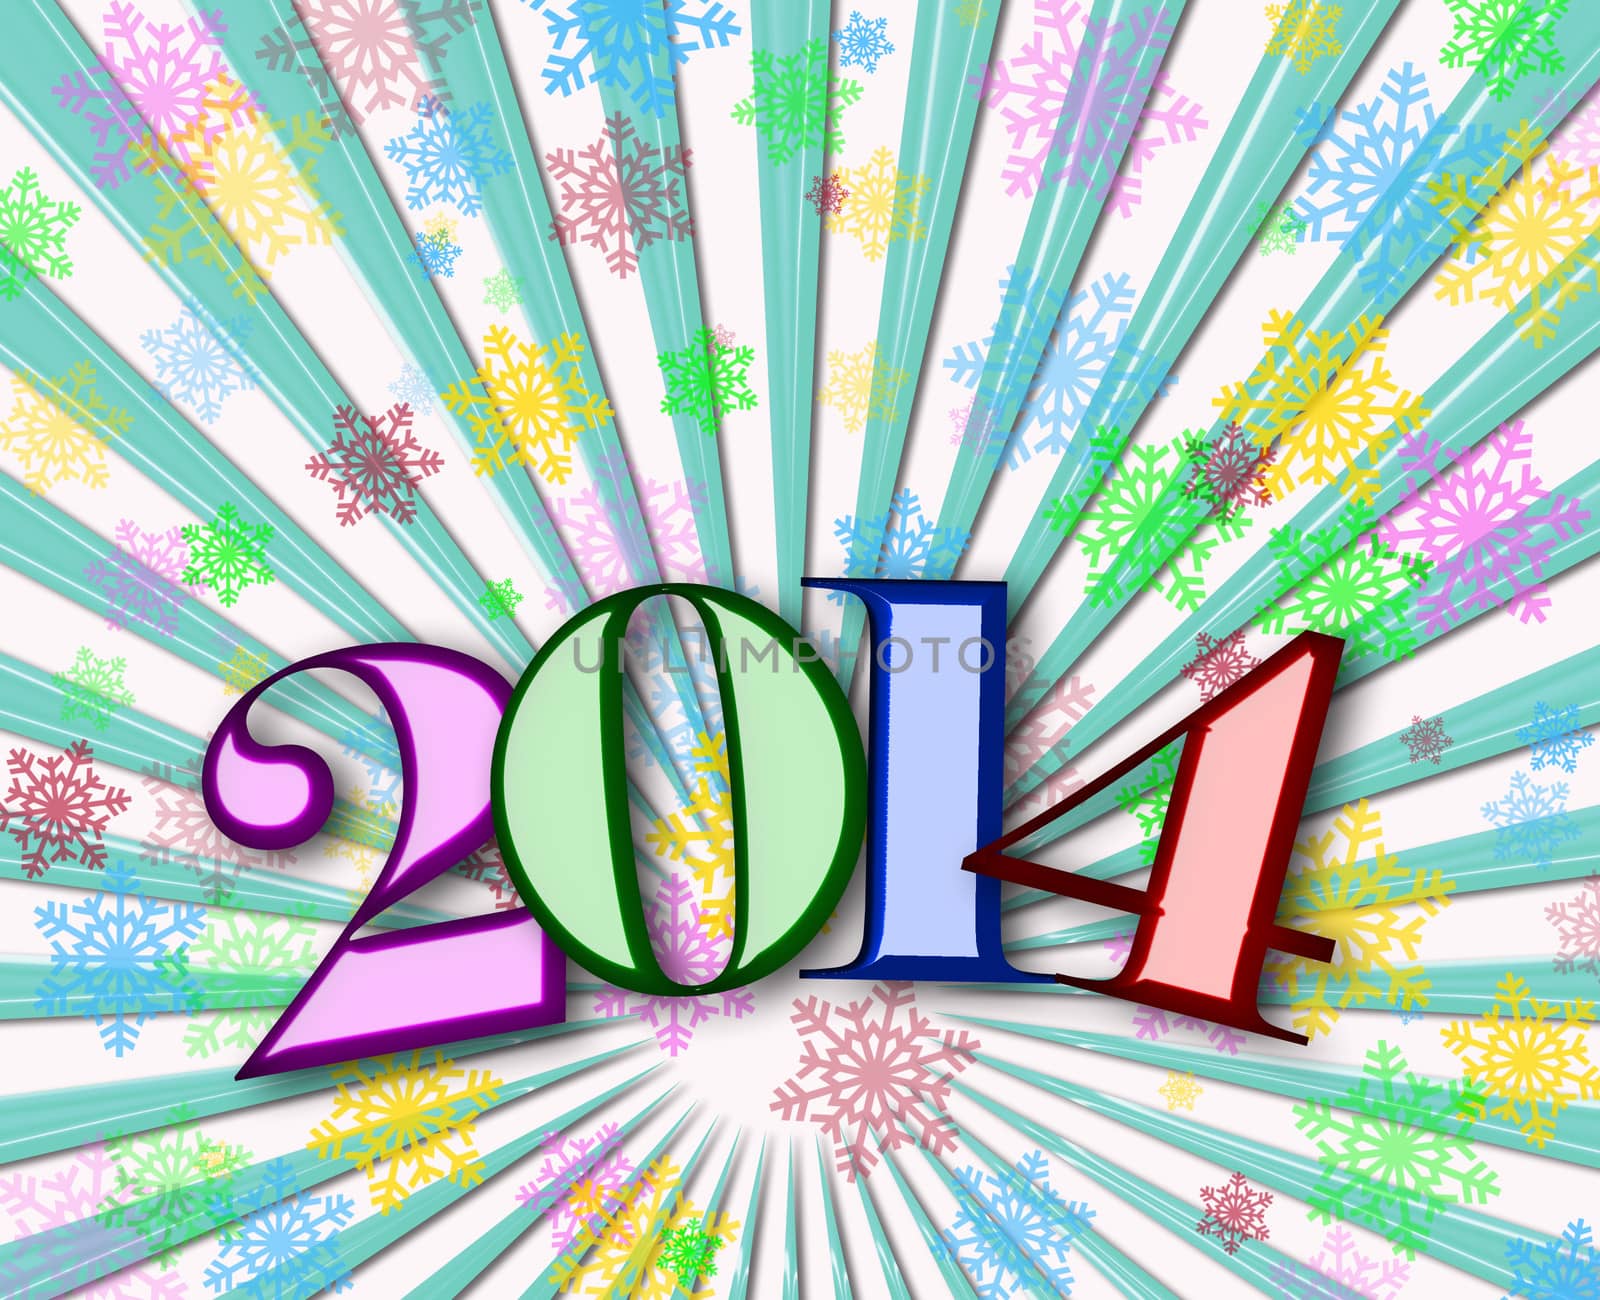 Happy New Year 2014 background with colorful snowflakes